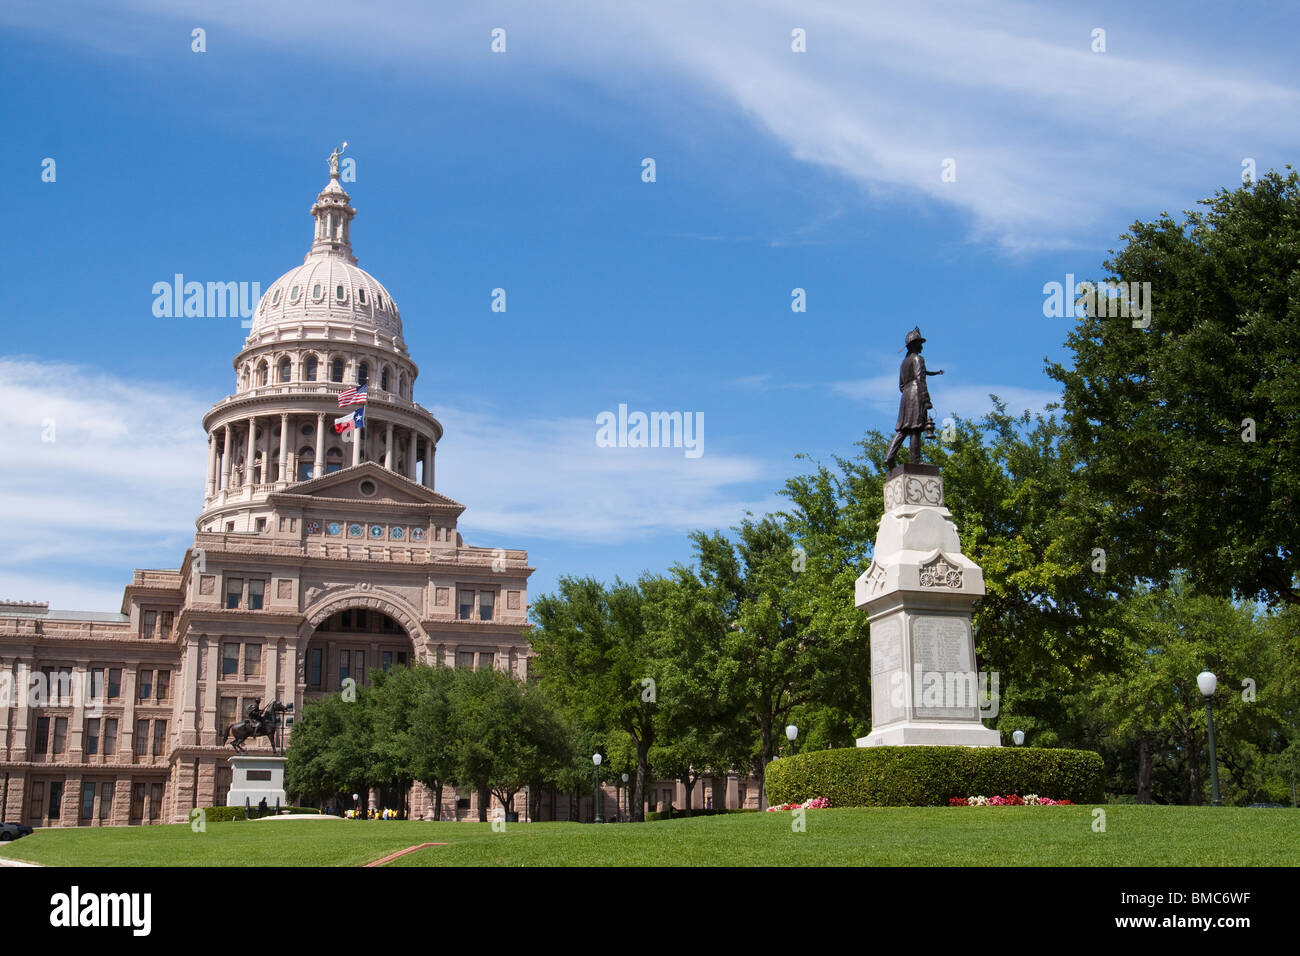 Front of Texas state capitol building or statehouse in Austin with volunteer fireman and Texas Rangers statues Stock Photo